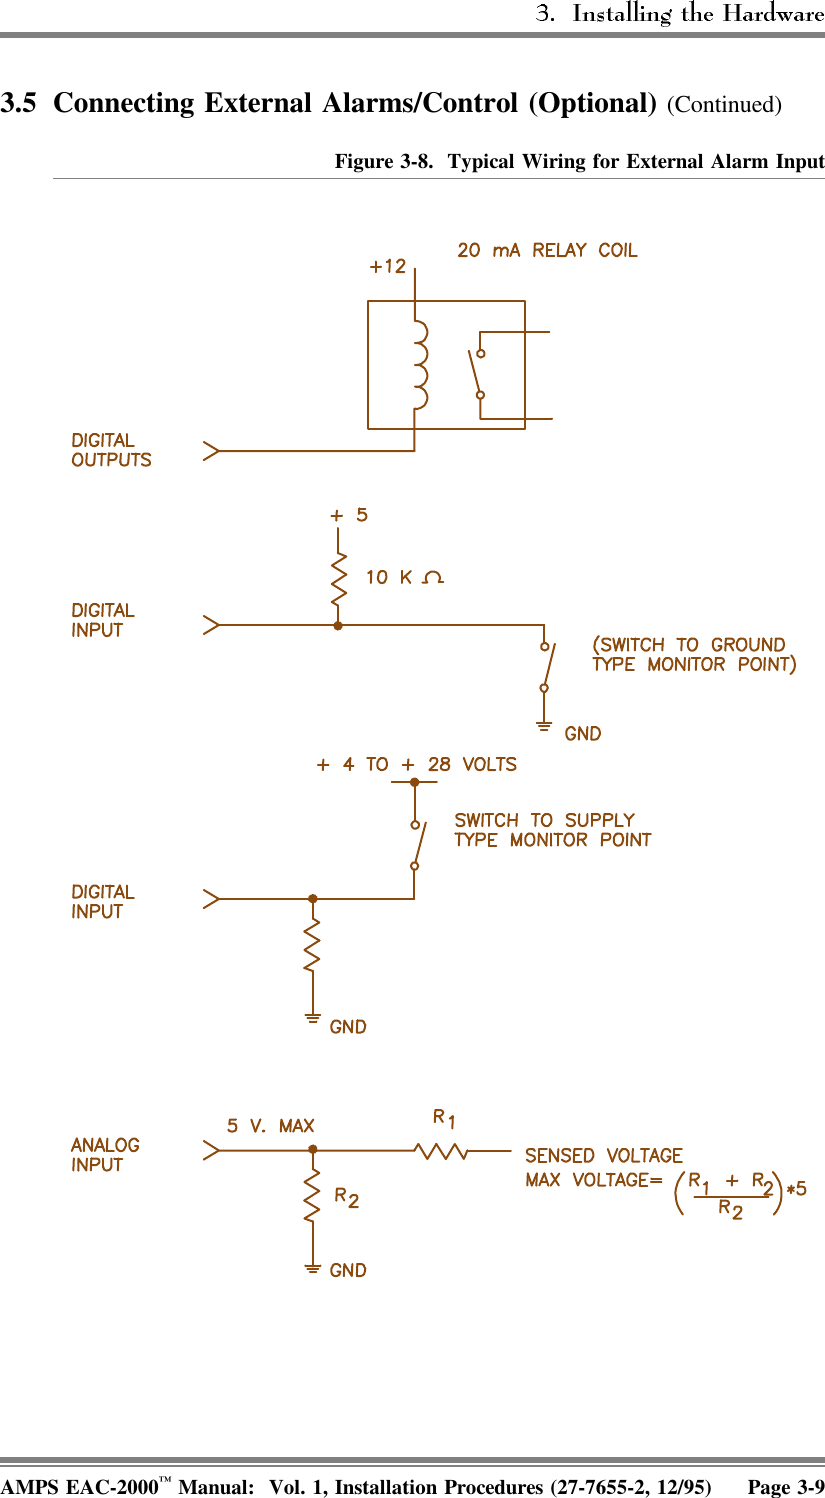 3.5 Connecting External Alarms/Control (Optional) (Continued)Figure 3-8.  Typical Wiring for External Alarm InputAMPS EAC-2000™ Manual:  Vol. 1, Installation Procedures (27-7655-2, 12/95) Page 3-9